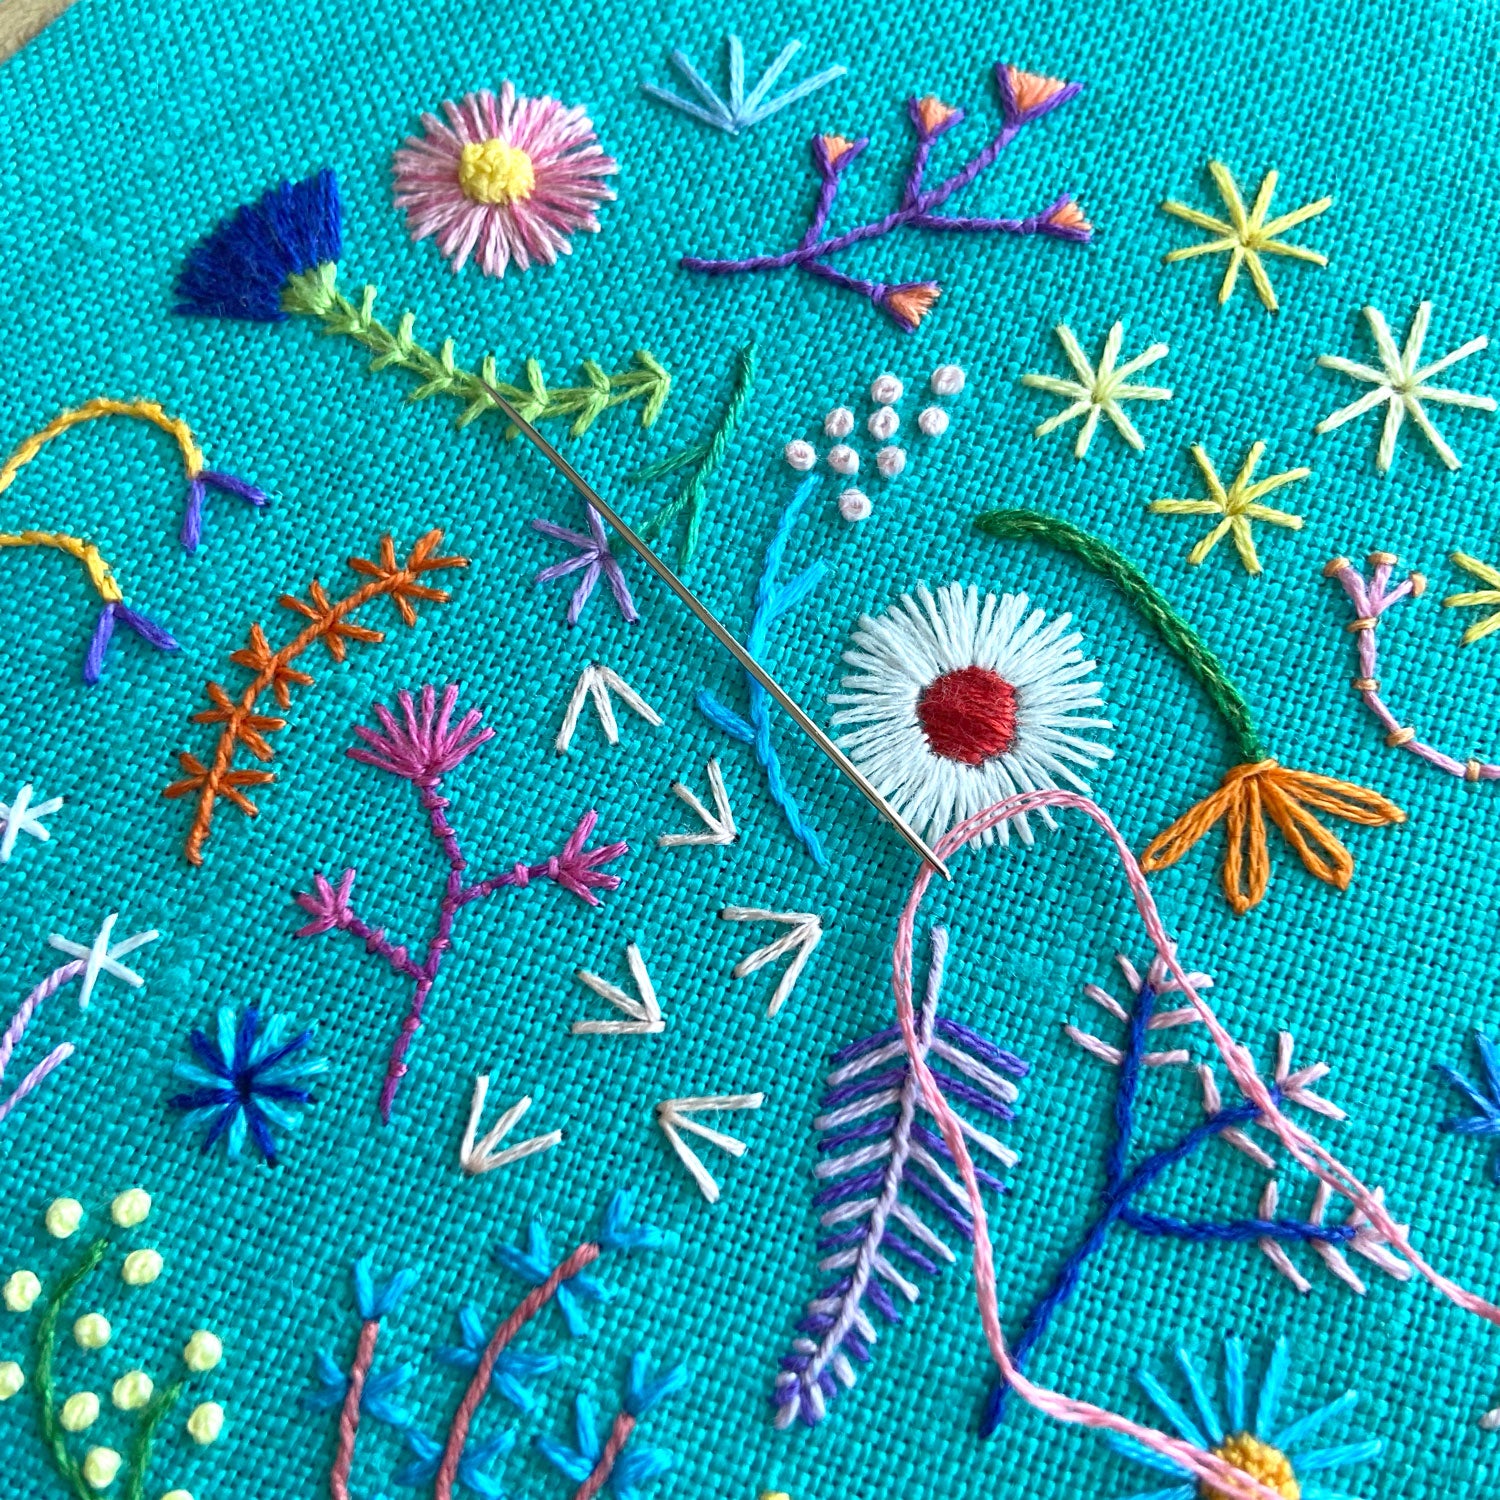 Rainbow Flowers (3.5") on Turquoise Linen Hand Embroidered Art